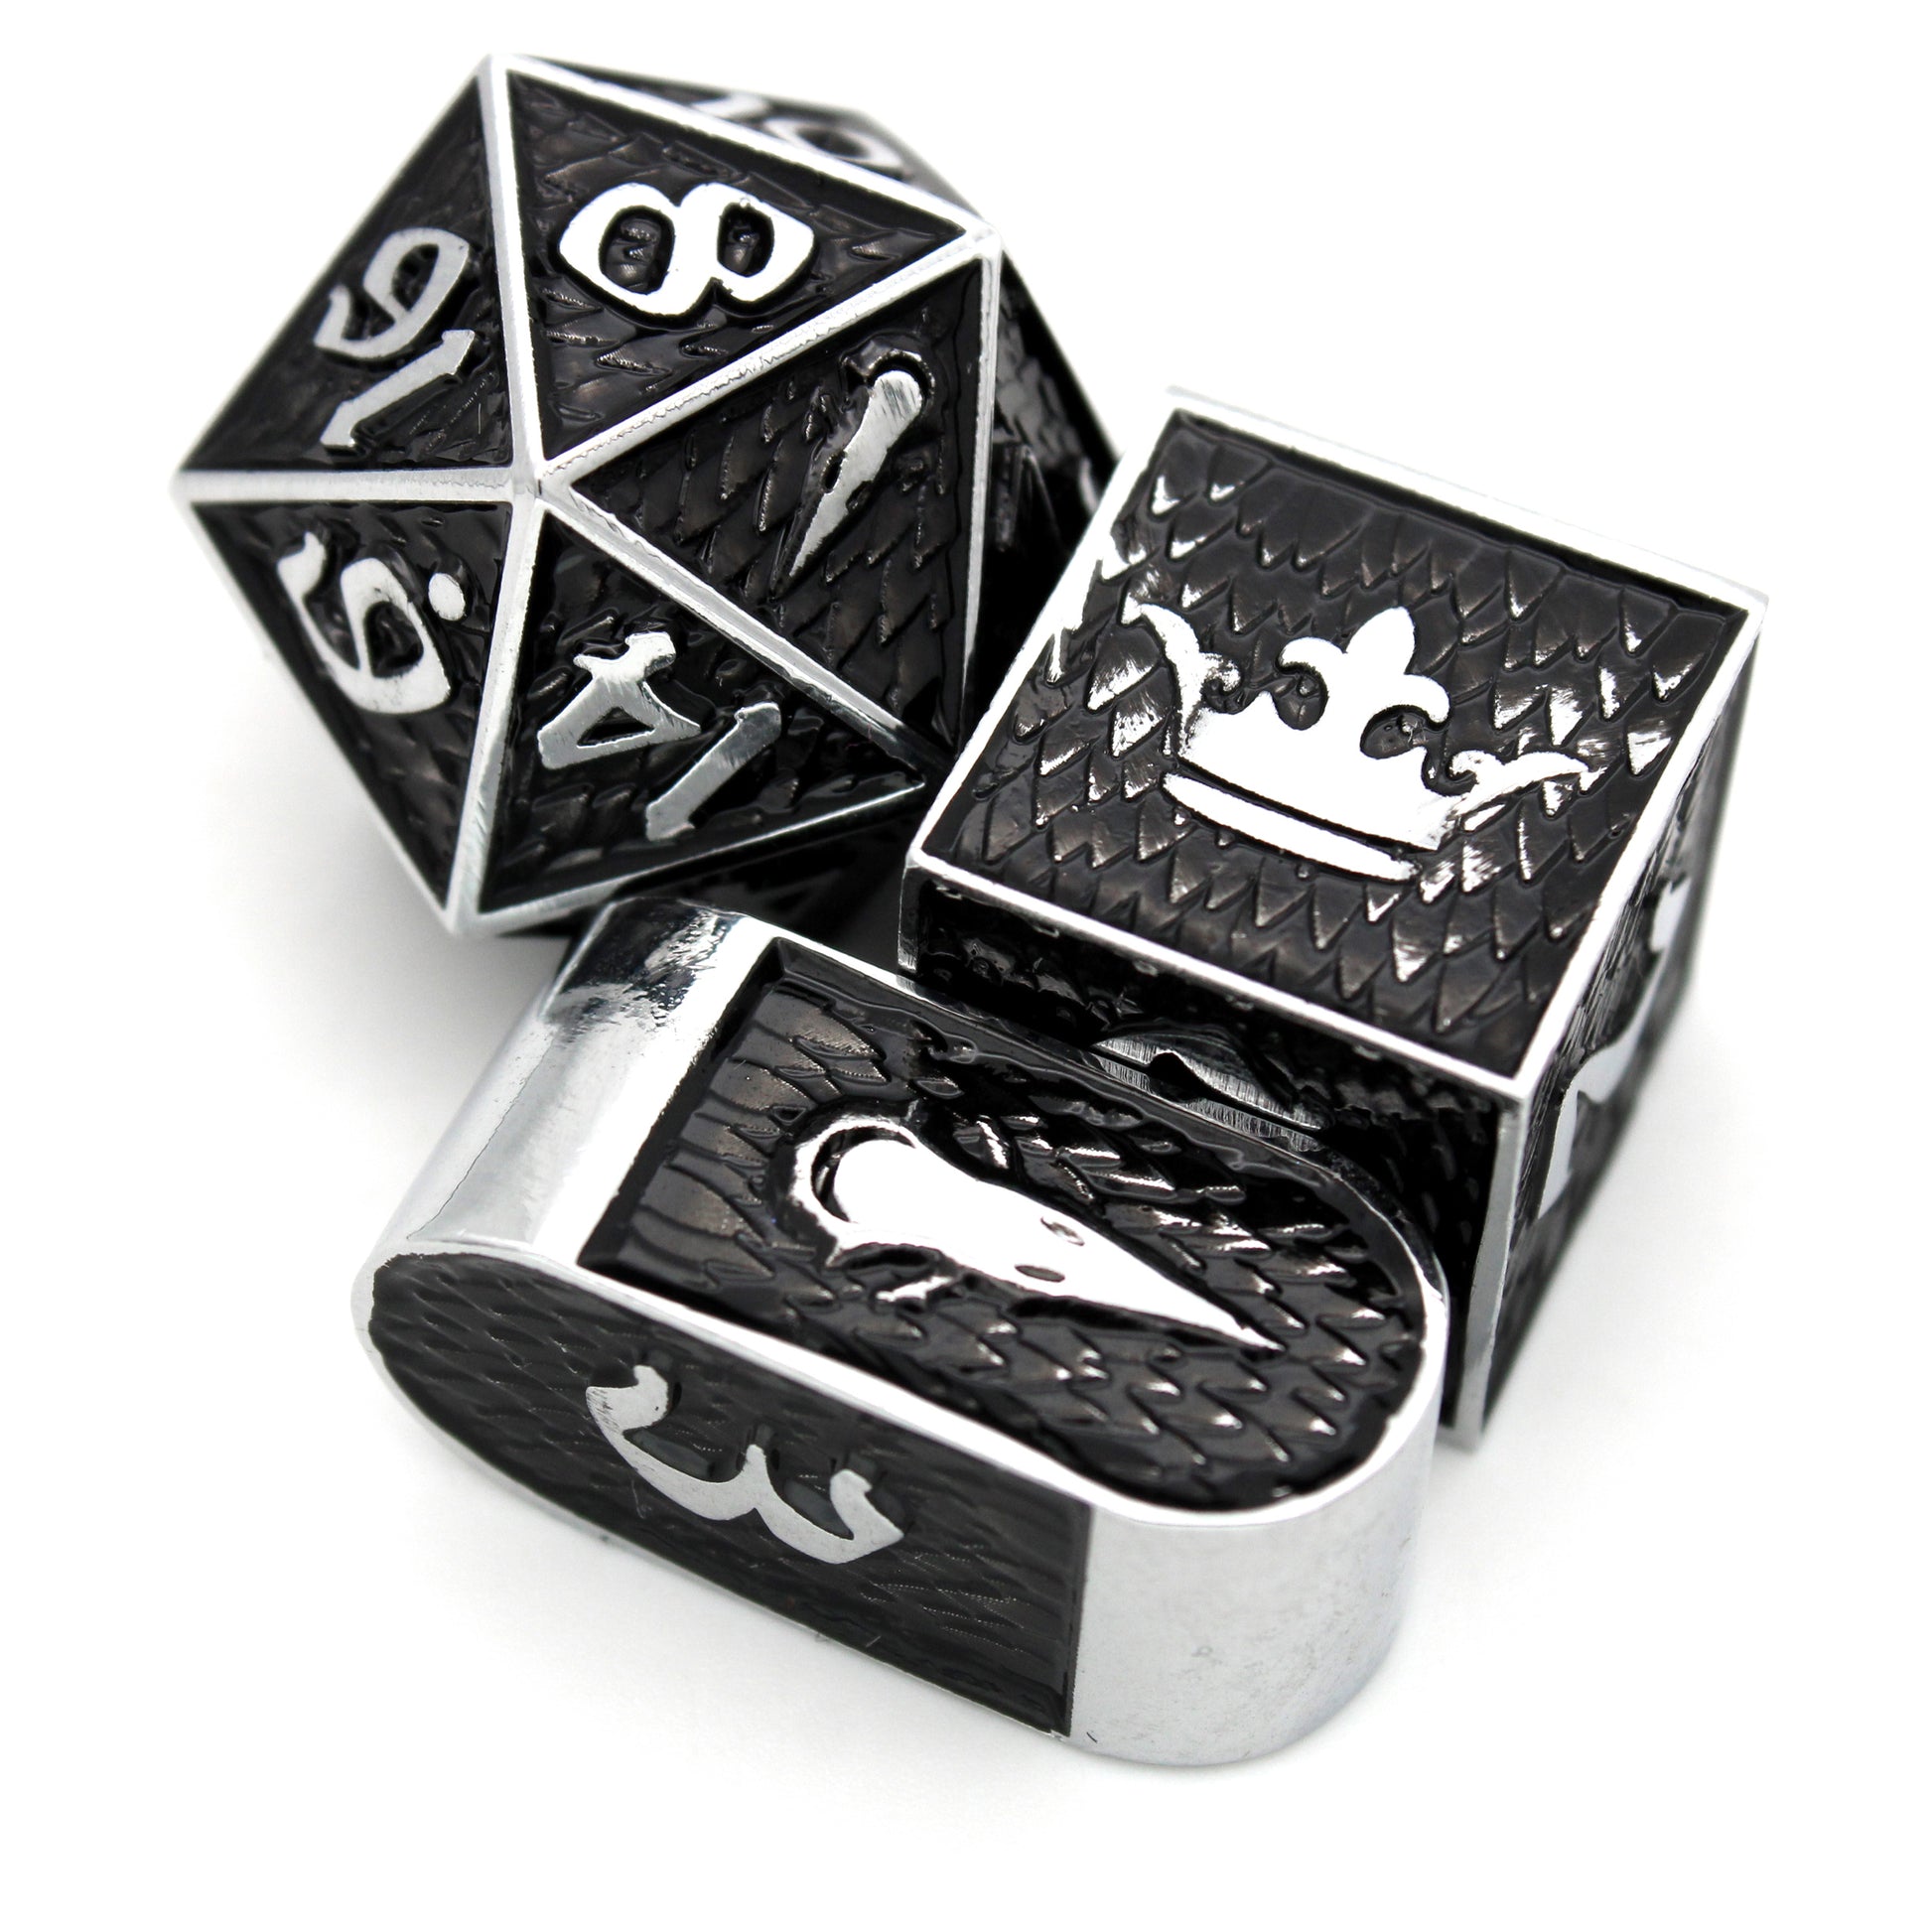 Shadowfell is an 8-piece Dice Envy Exclusive set of silver metal dice featuring raven imagery, cloaked in shadowy black ink.